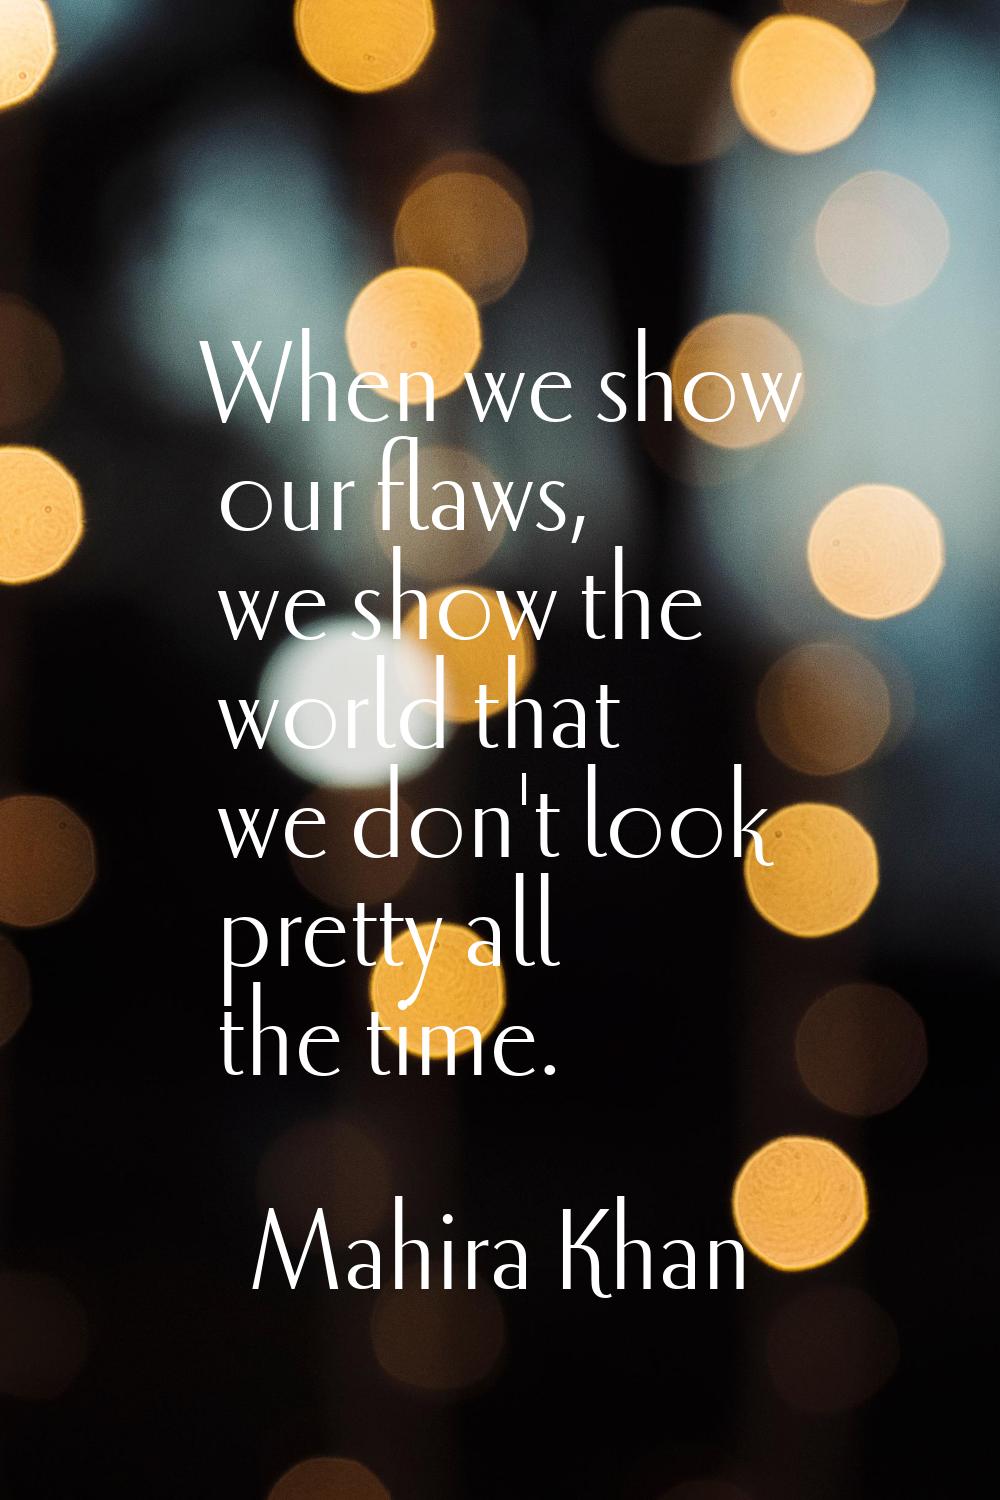 When we show our flaws, we show the world that we don't look pretty all the time.